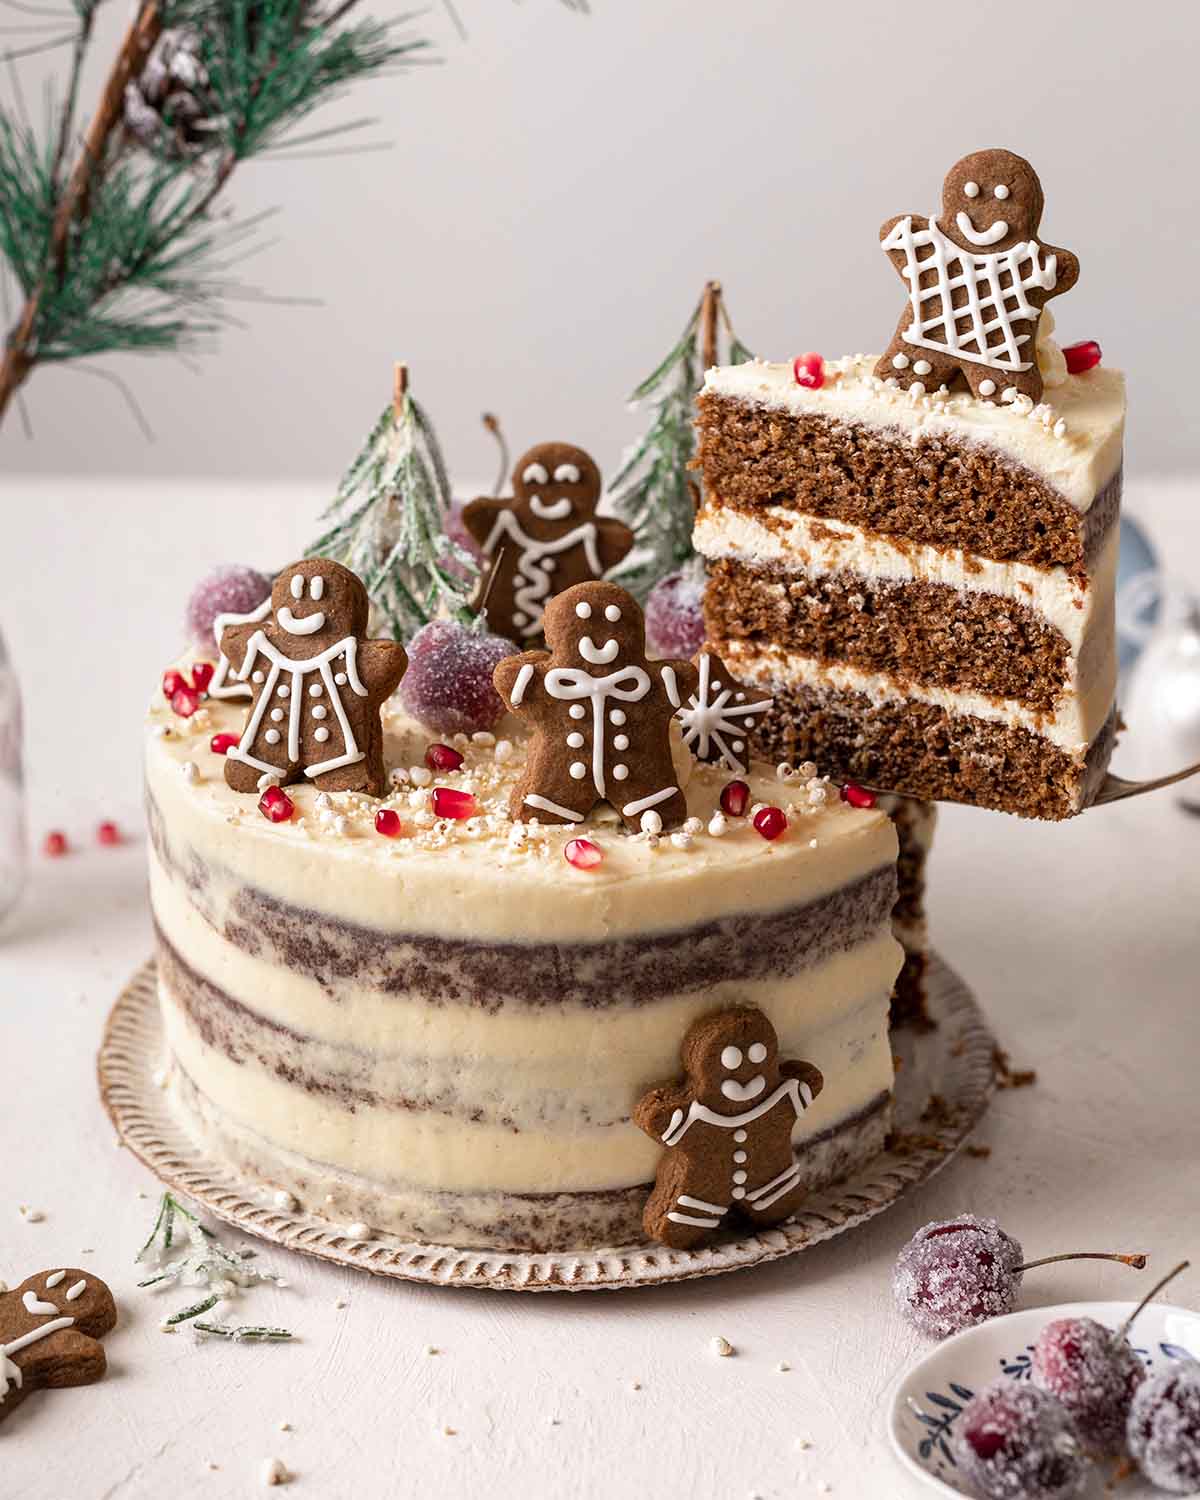 Decorated 3-layered gingerbread cake with a slice lifted up revealing layers of cake and frosting.